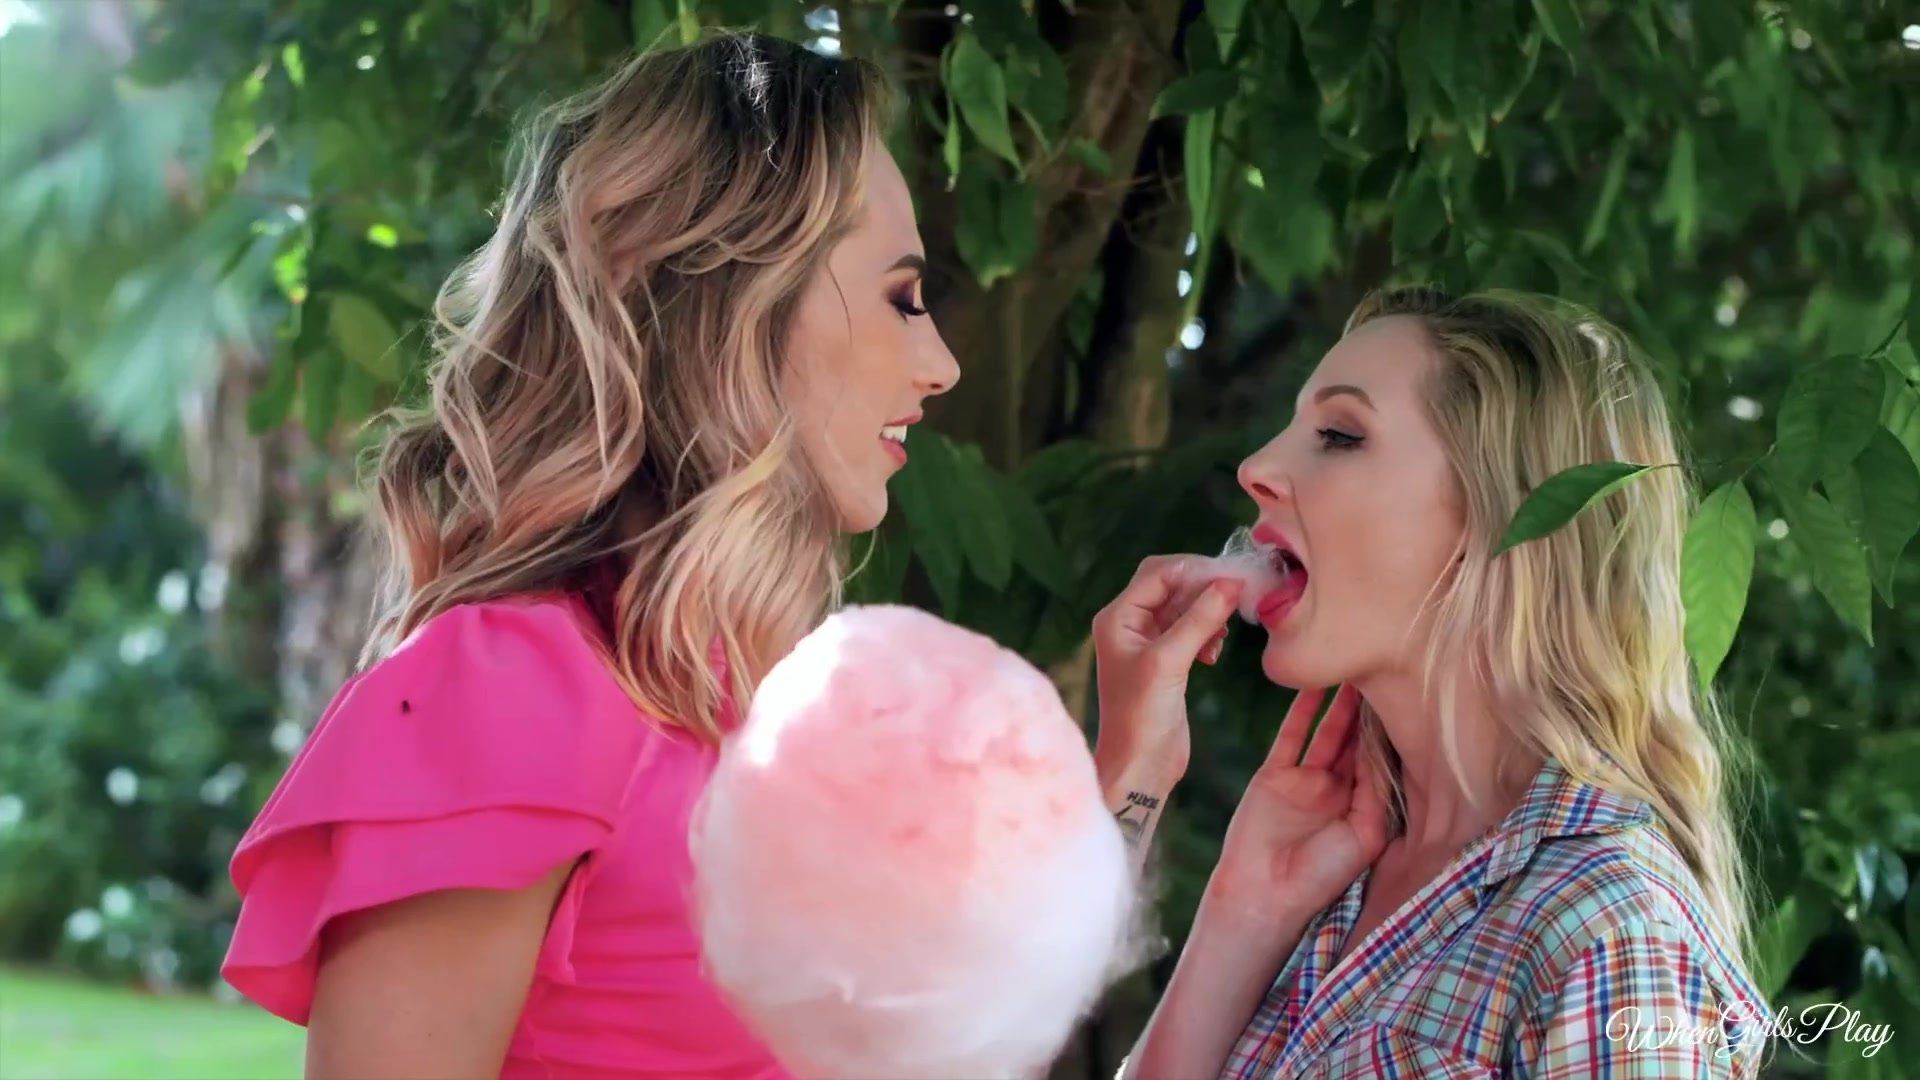 TonicMovies Carter Cruise and Madison Mia licking passionately outdoors Animation